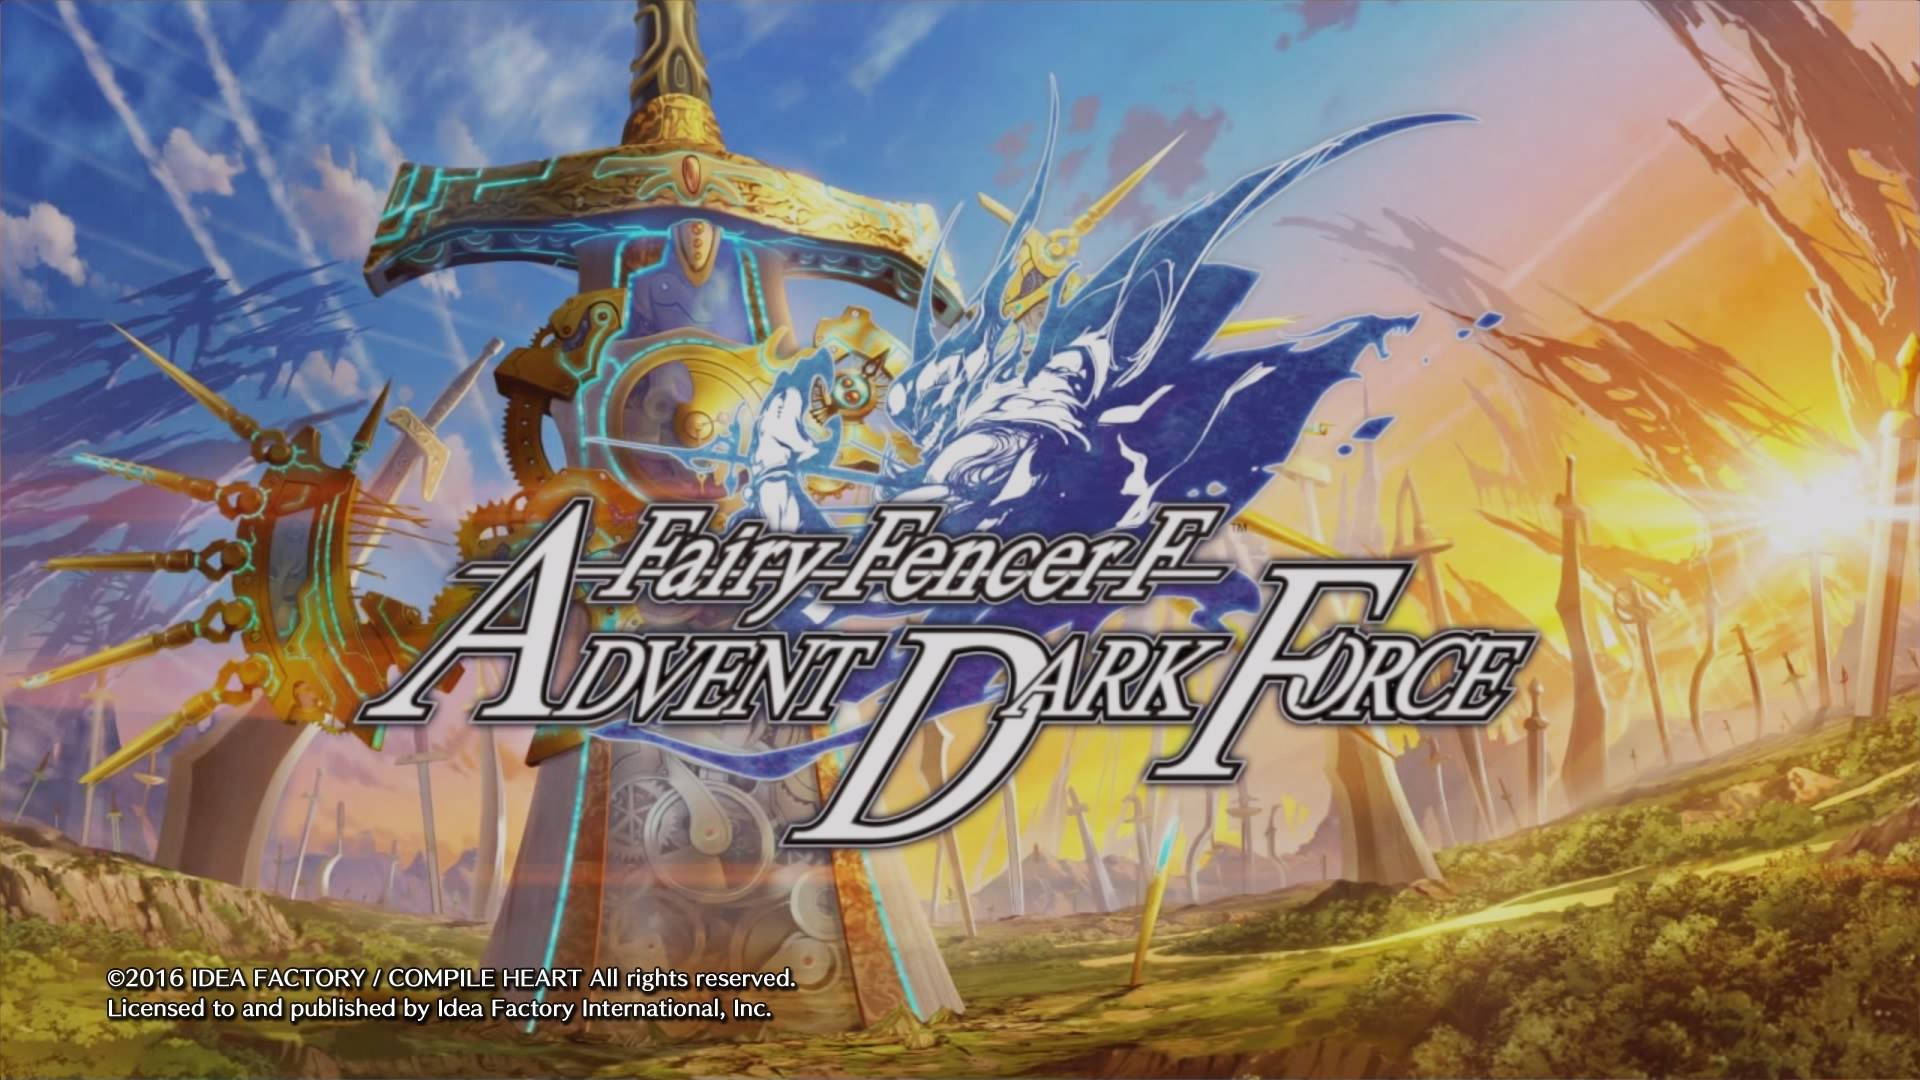 Fairy Fencer F Advent Dark Force Title Screen - Fairy Fencer F Advent Dark Force , HD Wallpaper & Backgrounds